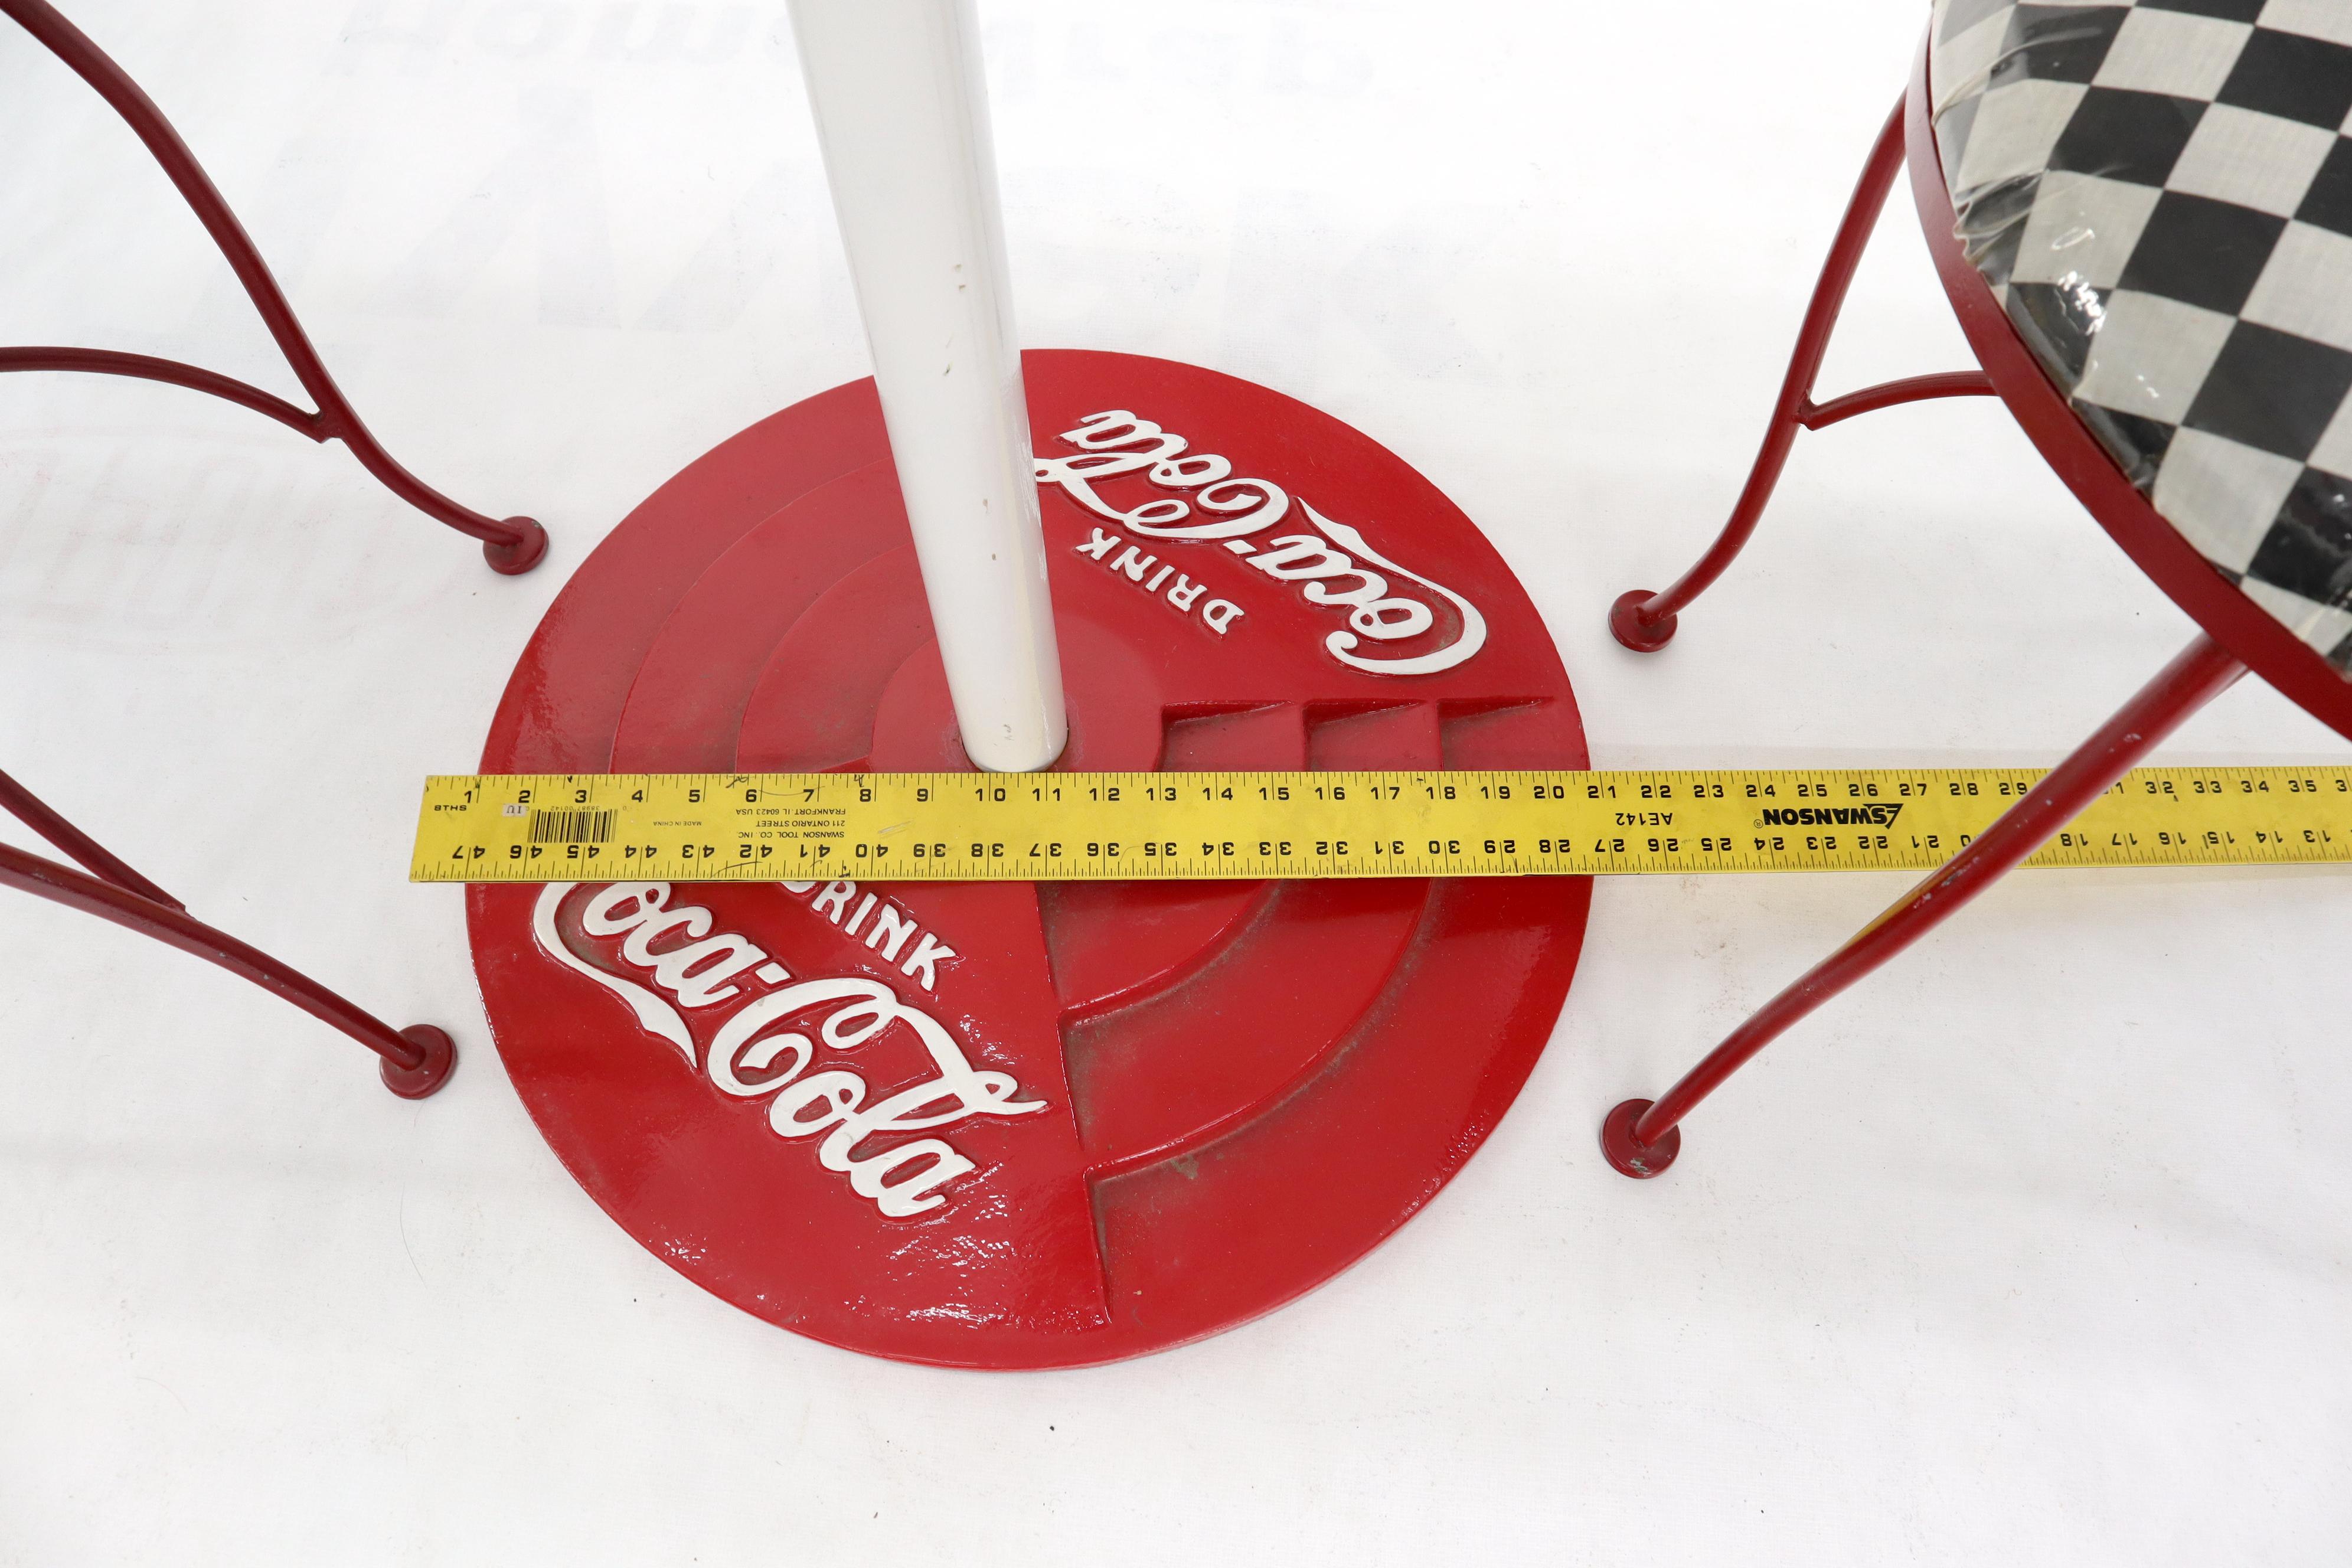 Two Chairs Cast Iron Marble-Top Table Coca-Cola Dinette Ice Cream Set Cafe Table For Sale 3